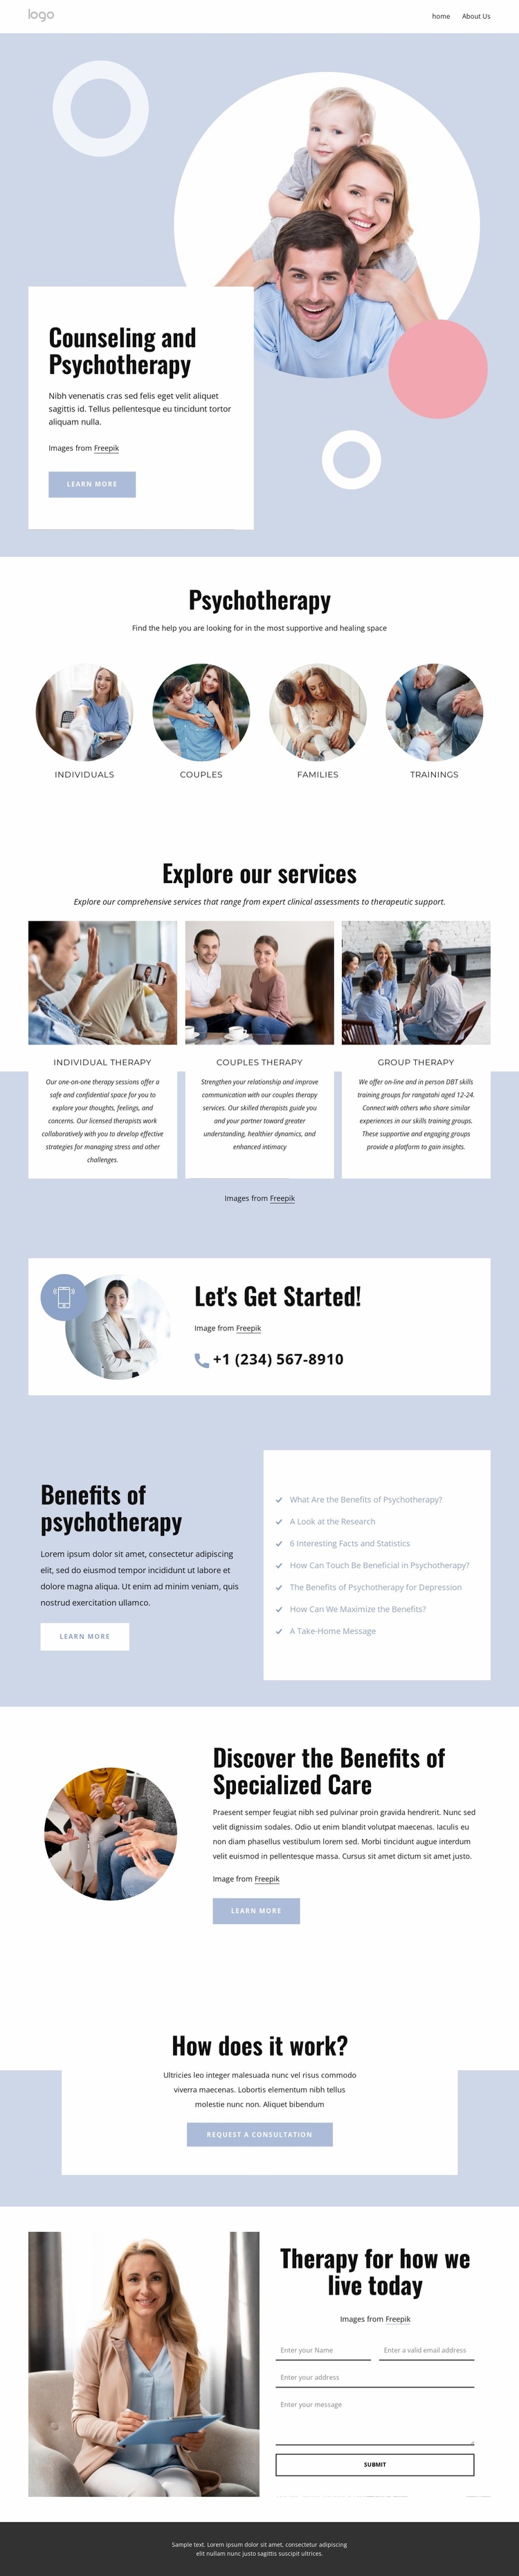 Counseling and psychotherapy Ecommerce Website Design